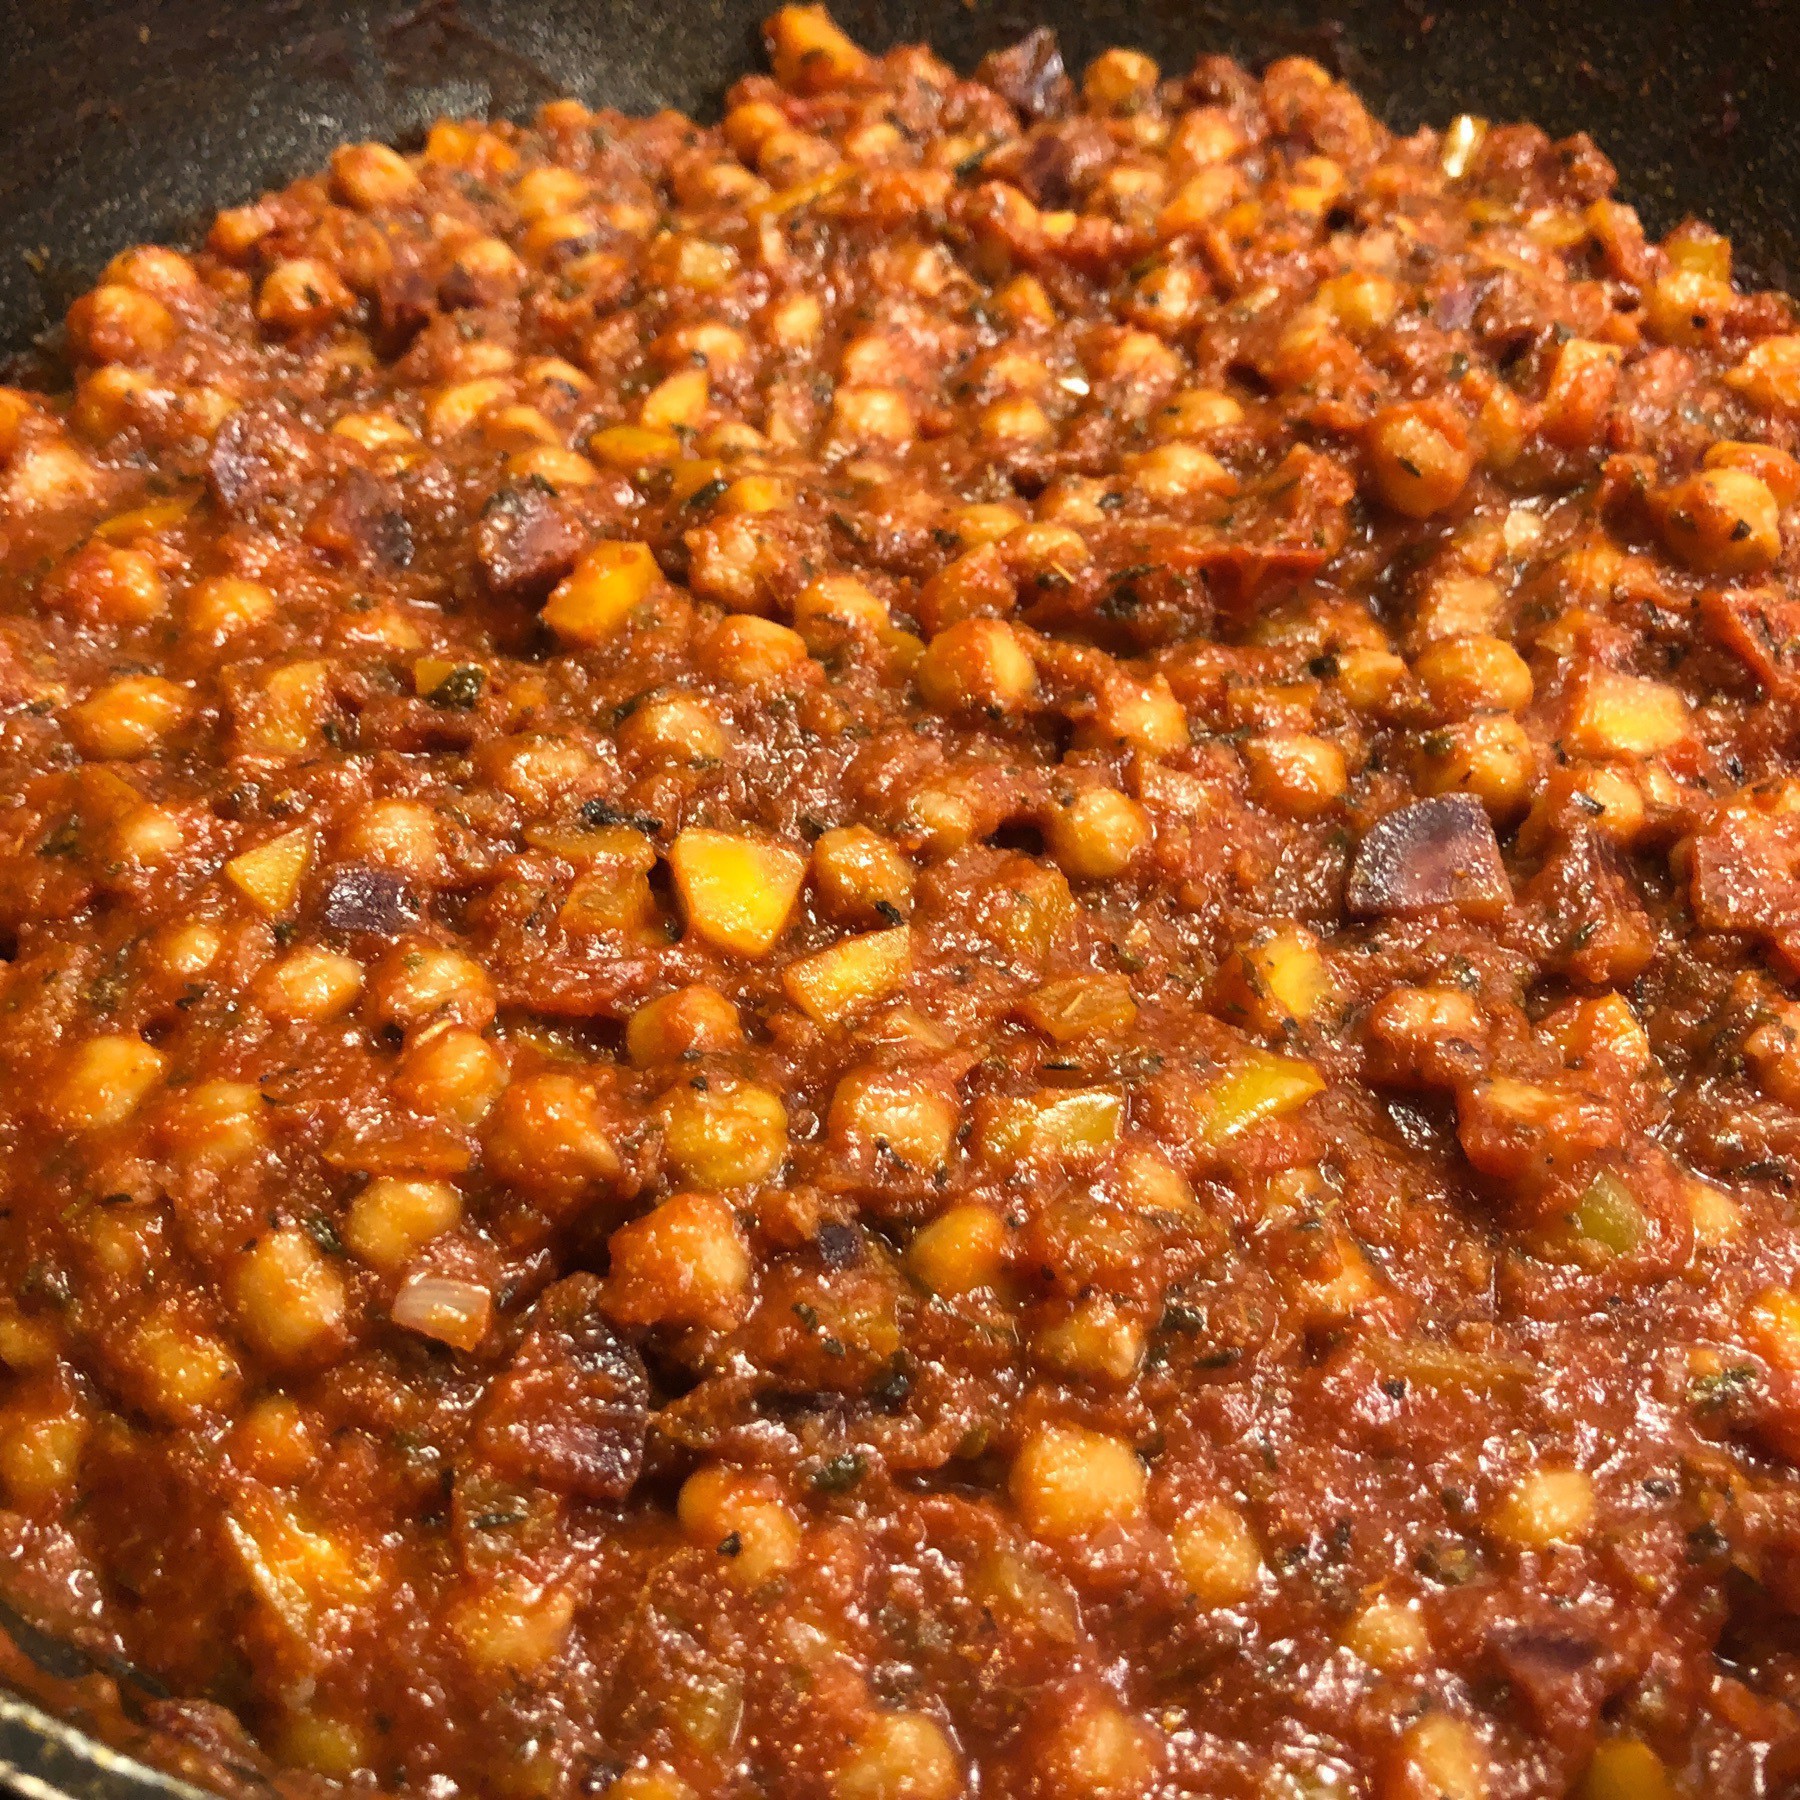 Tomato sauce with chickpeas.